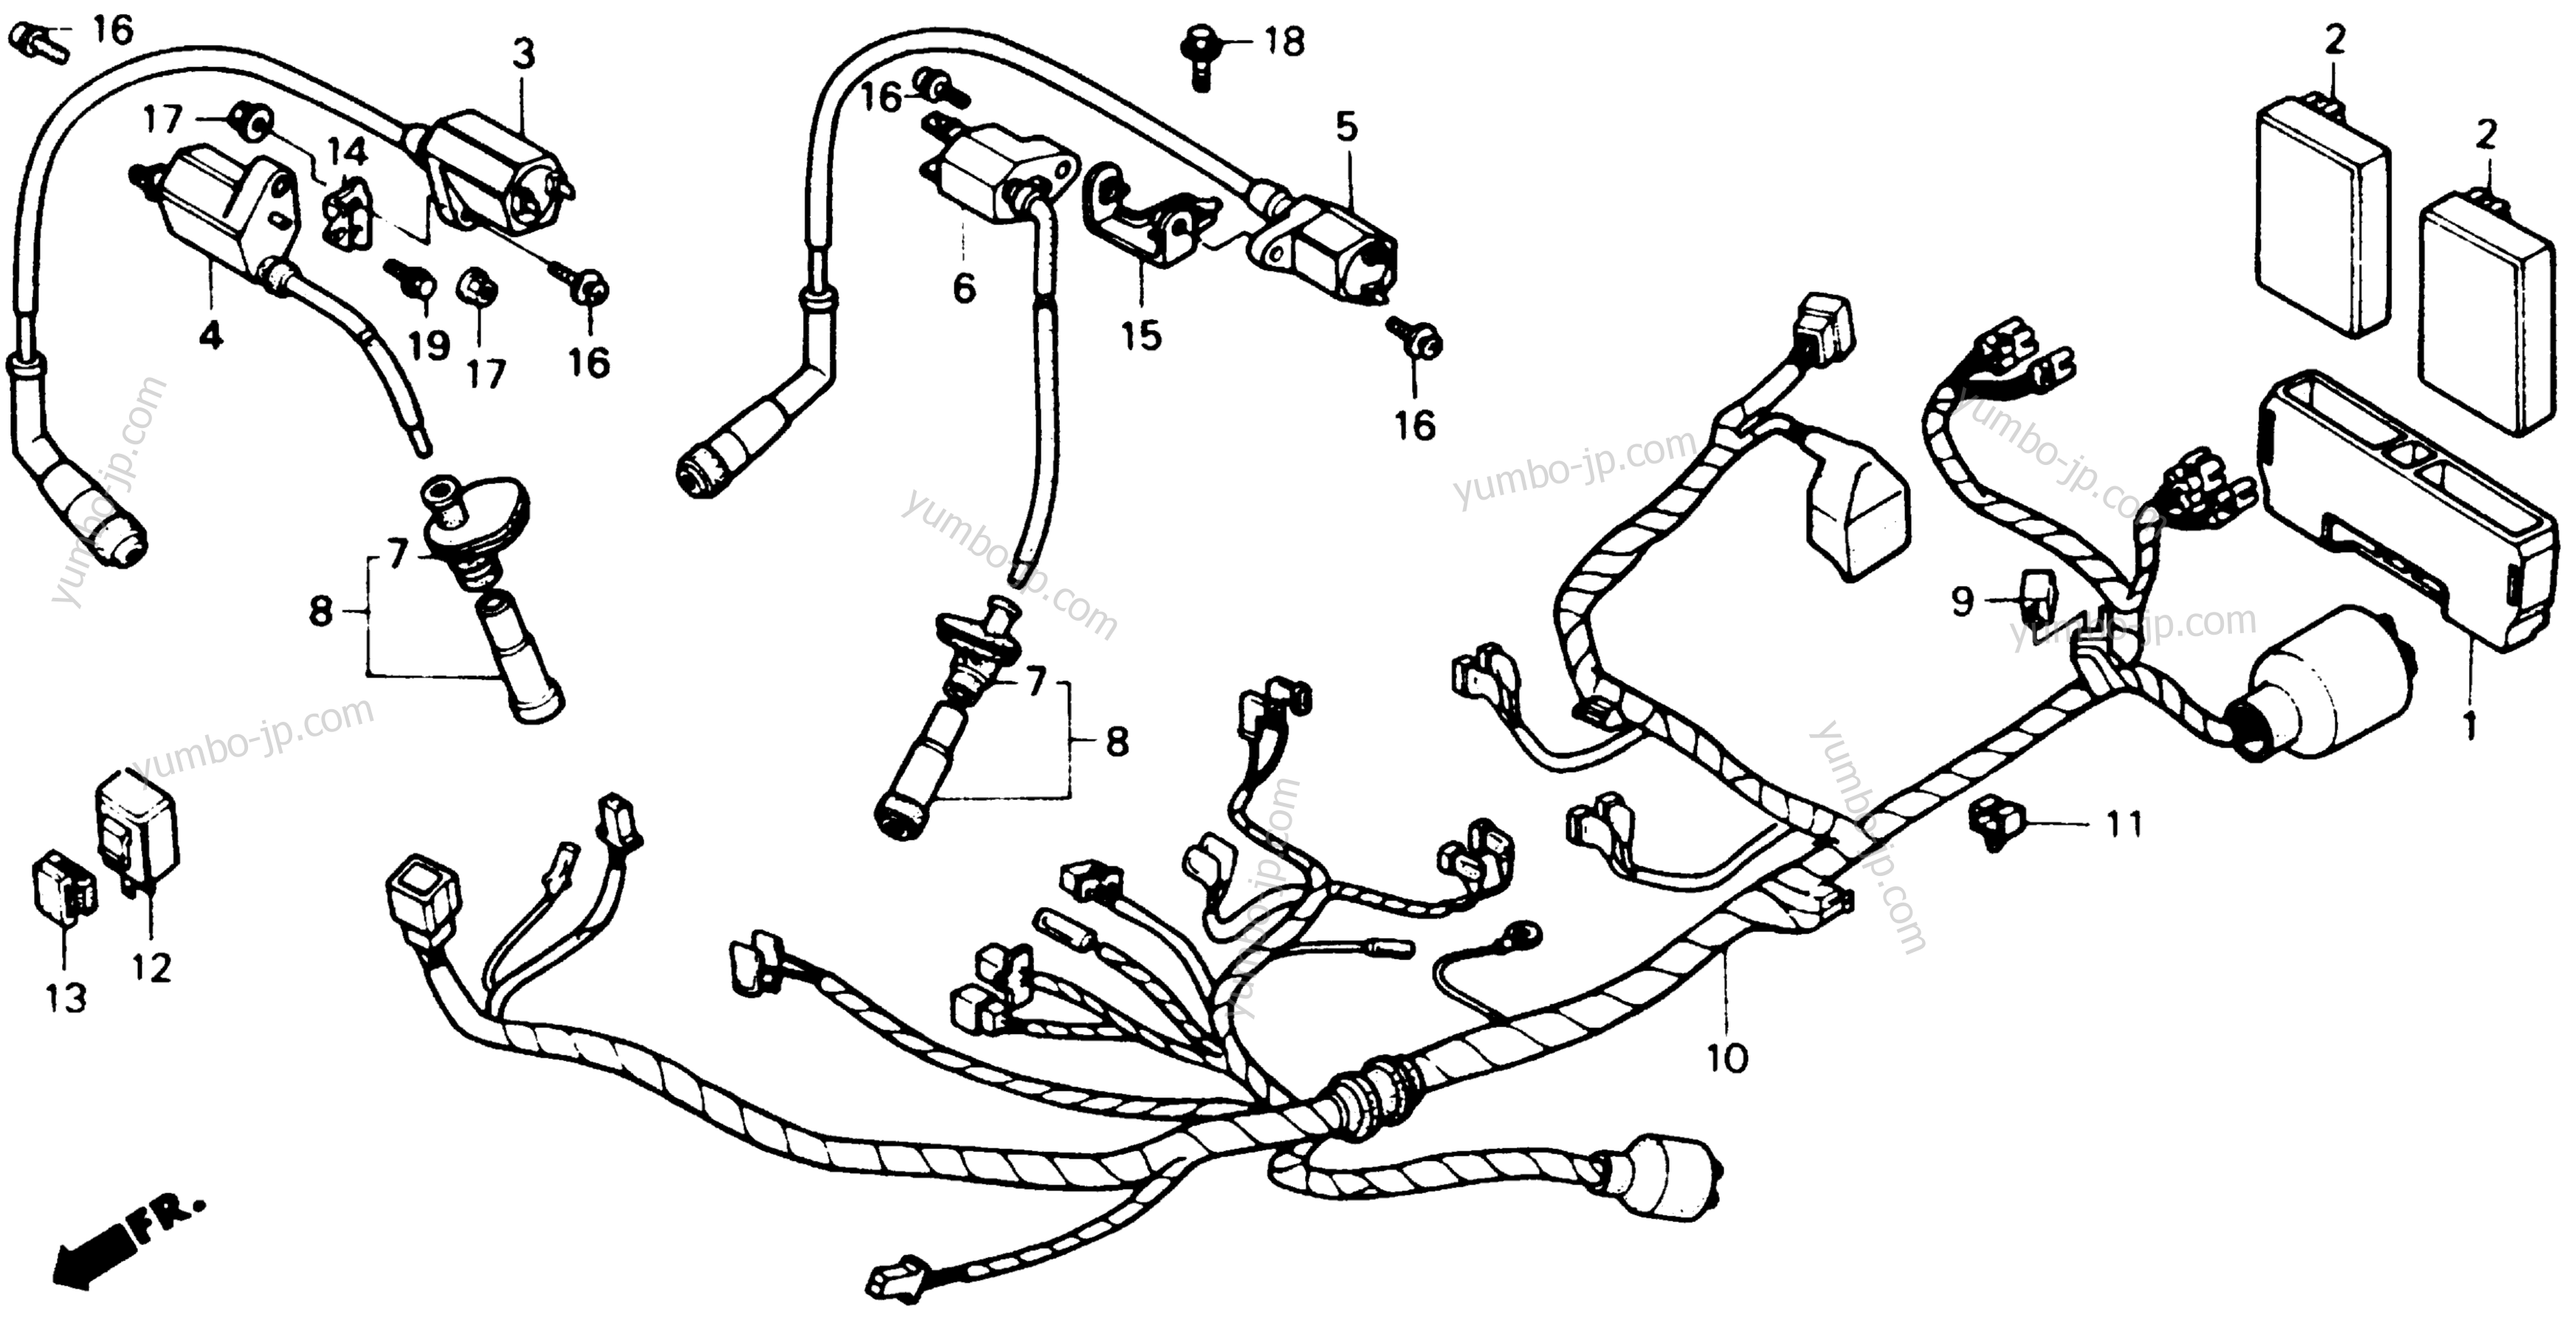 WIRE HARNESS for motorcycles HONDA XL600V A 1989 year